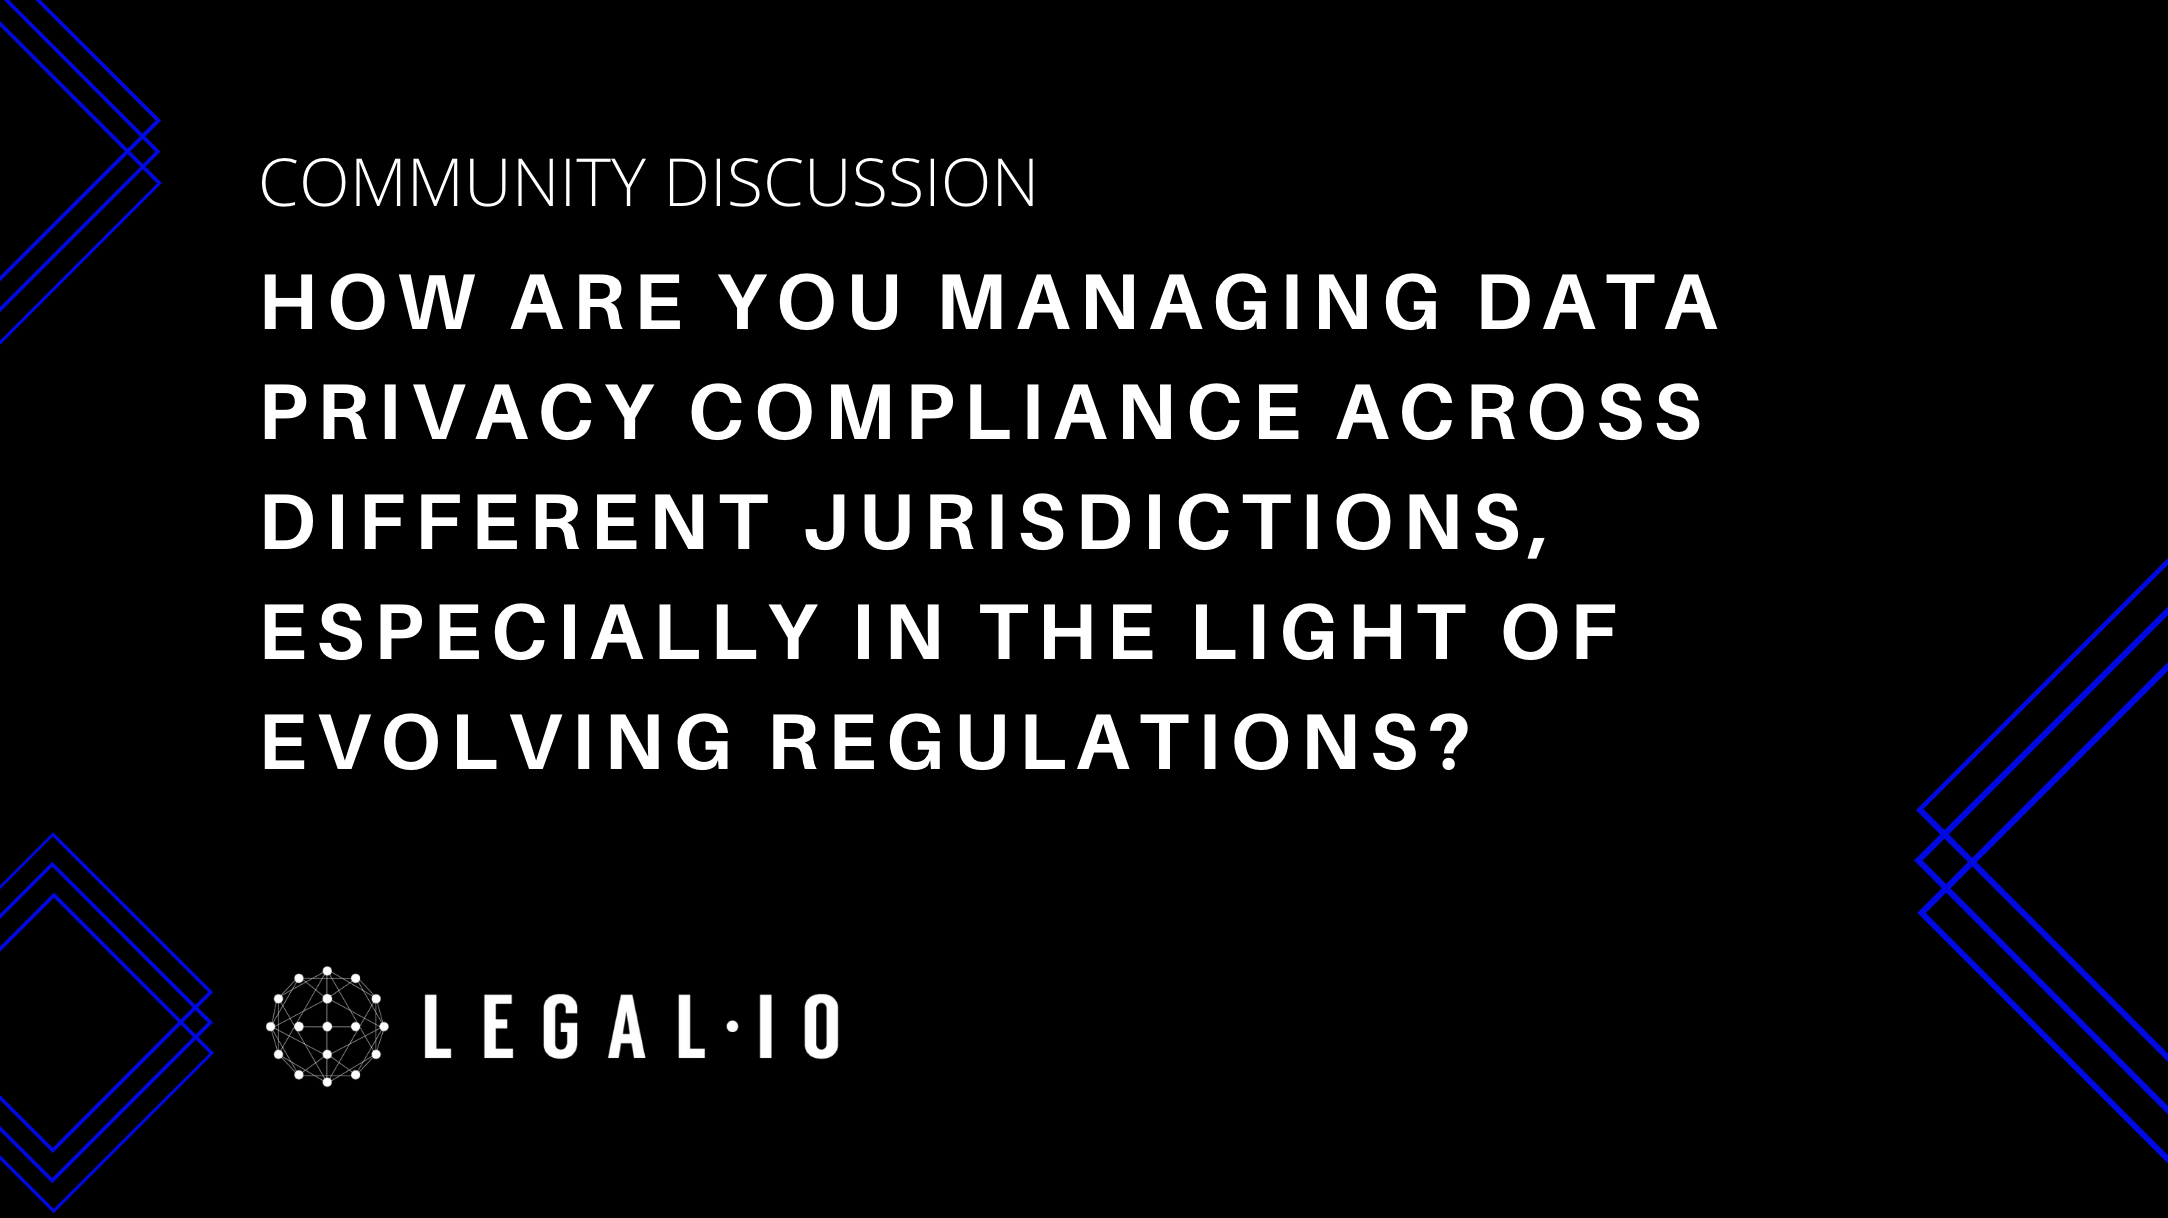 Community Discussion: How are you managing data privacy compliance across different jurisdictions, especially in the light of evolving regulations?